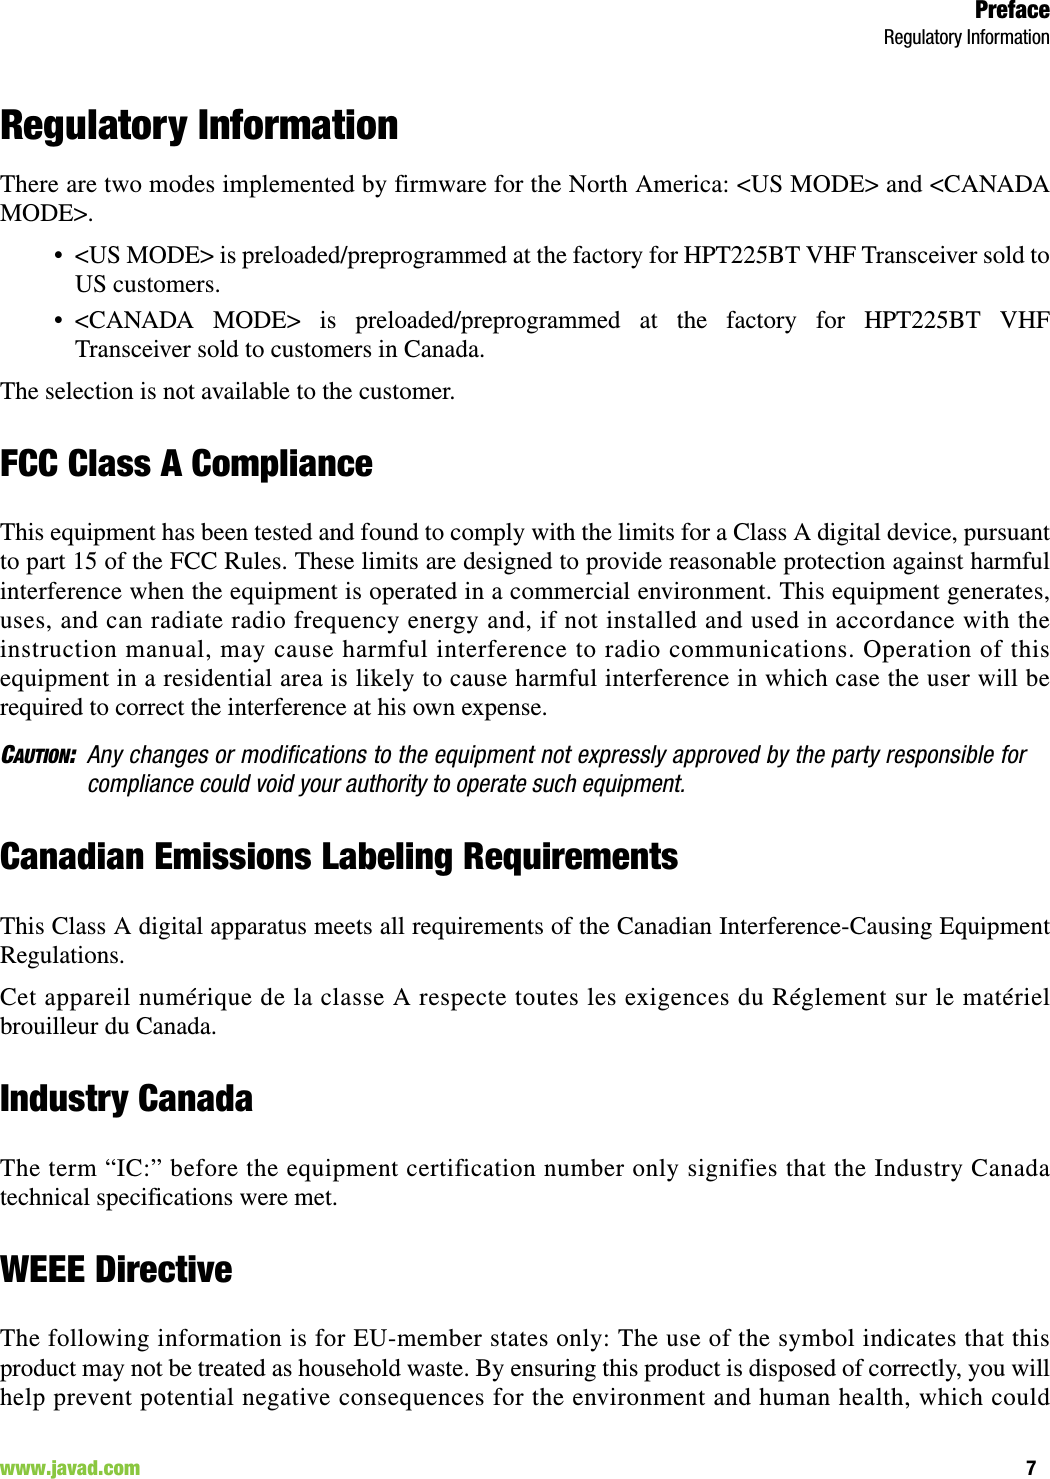 PrefaceRegulatory Information7www.javad.com                                                                                                                                                        Regulatory InformationThere are two modes implemented by firmware for the North America: &lt;US MODE&gt; and &lt;CANADAMODE&gt;. • &lt;US MODE&gt; is preloaded/preprogrammed at the factory for HPT225BT VHF Transceiver sold toUS customers.• &lt;CANADA MODE&gt; is preloaded/preprogrammed at the factory for HPT225BT VHFTransceiver sold to customers in Canada.The selection is not available to the customer. FCC Class A ComplianceThis equipment has been tested and found to comply with the limits for a Class A digital device, pursuantto part 15 of the FCC Rules. These limits are designed to provide reasonable protection against harmfulinterference when the equipment is operated in a commercial environment. This equipment generates,uses, and can radiate radio frequency energy and, if not installed and used in accordance with theinstruction manual, may cause harmful interference to radio communications. Operation of thisequipment in a residential area is likely to cause harmful interference in which case the user will berequired to correct the interference at his own expense.CAUTION:Any changes or modifications to the equipment not expressly approved by the party responsible forcompliance could void your authority to operate such equipment.Canadian Emissions Labeling RequirementsThis Class A digital apparatus meets all requirements of the Canadian Interference-Causing EquipmentRegulations.Cet appareil numérique de la classe A respecte toutes les exigences du Réglement sur le matérielbrouilleur du Canada.Industry CanadaThe term “IC:” before the equipment certification number only signifies that the Industry Canadatechnical specifications were met.WEEE DirectiveThe following information is for EU-member states only: The use of the symbol indicates that thisproduct may not be treated as household waste. By ensuring this product is disposed of correctly, you willhelp prevent potential negative consequences for the environment and human health, which could